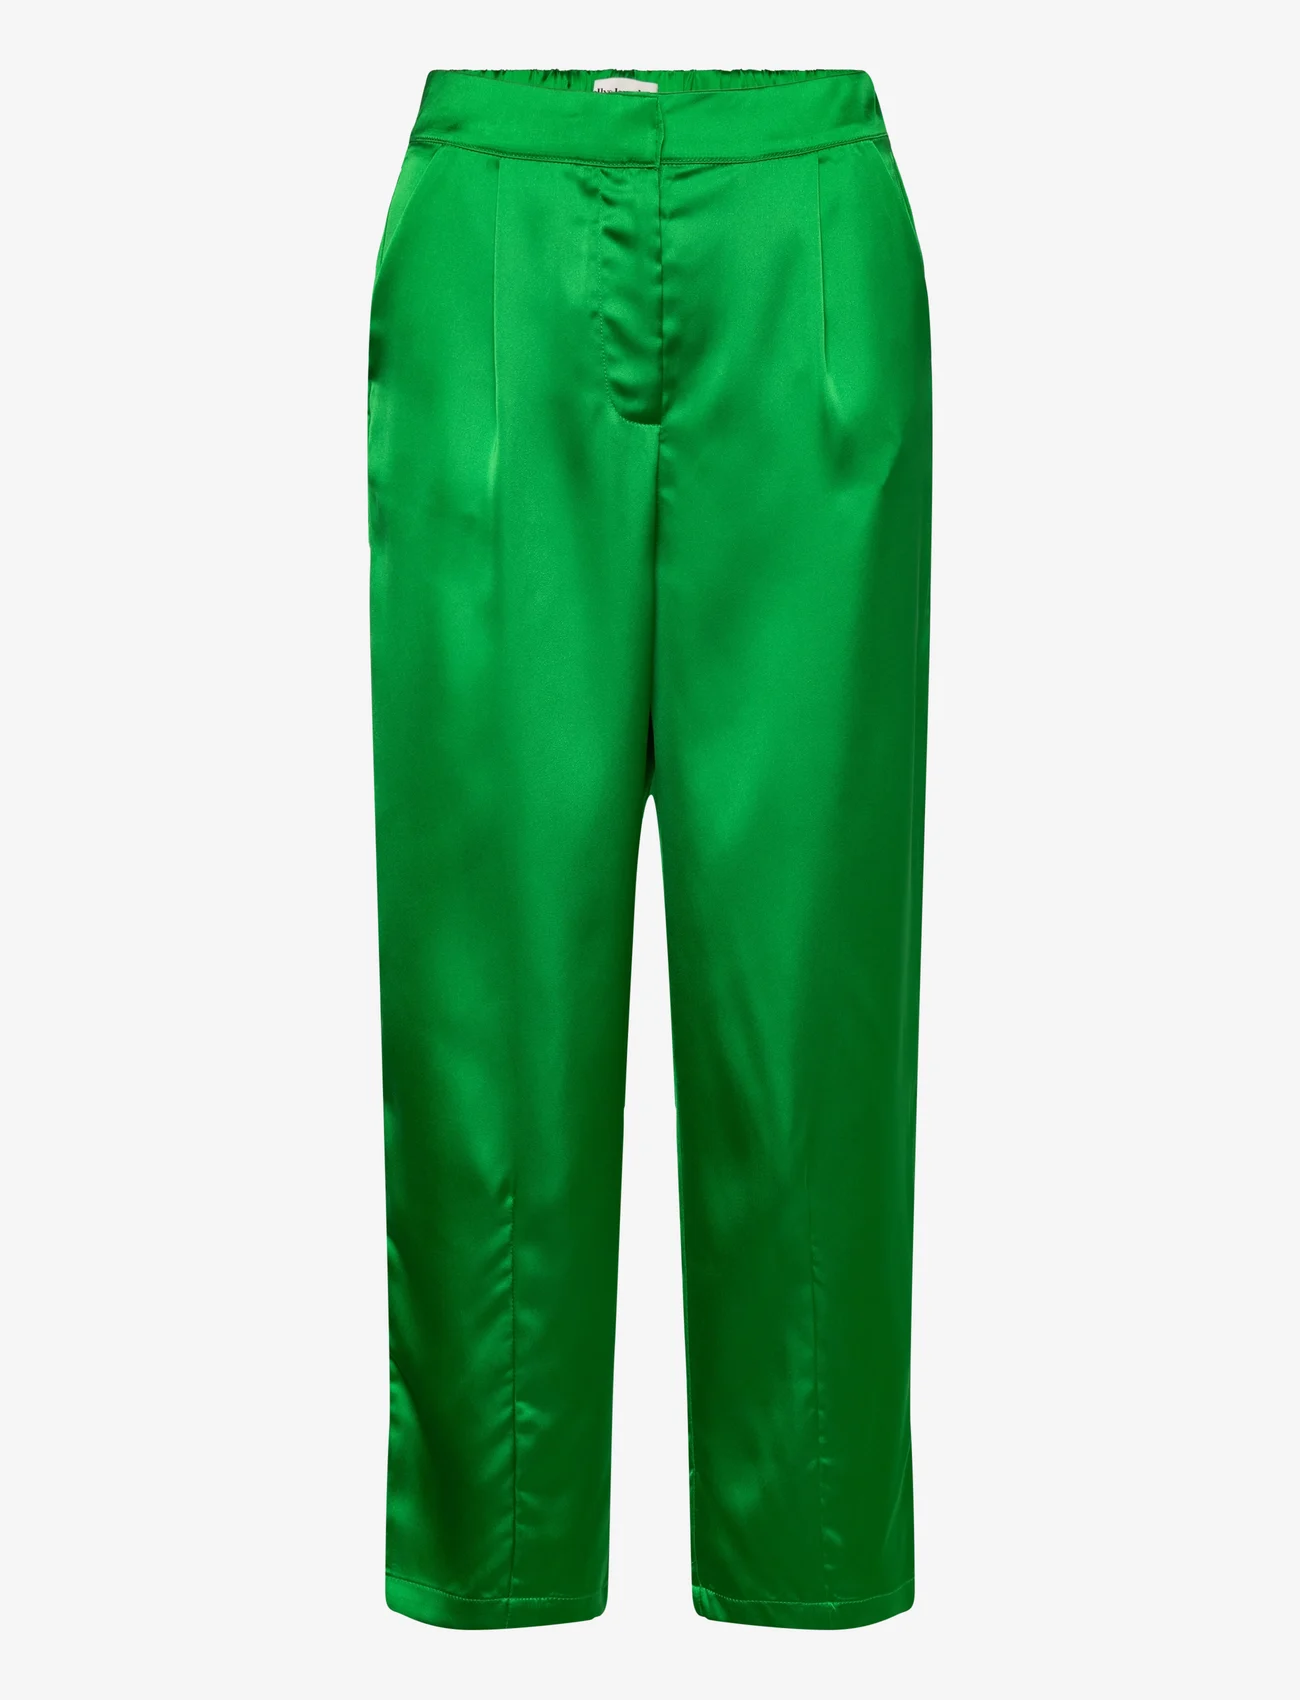 Lollys Laundry - Maisie Pants - straight leg trousers - green - 0